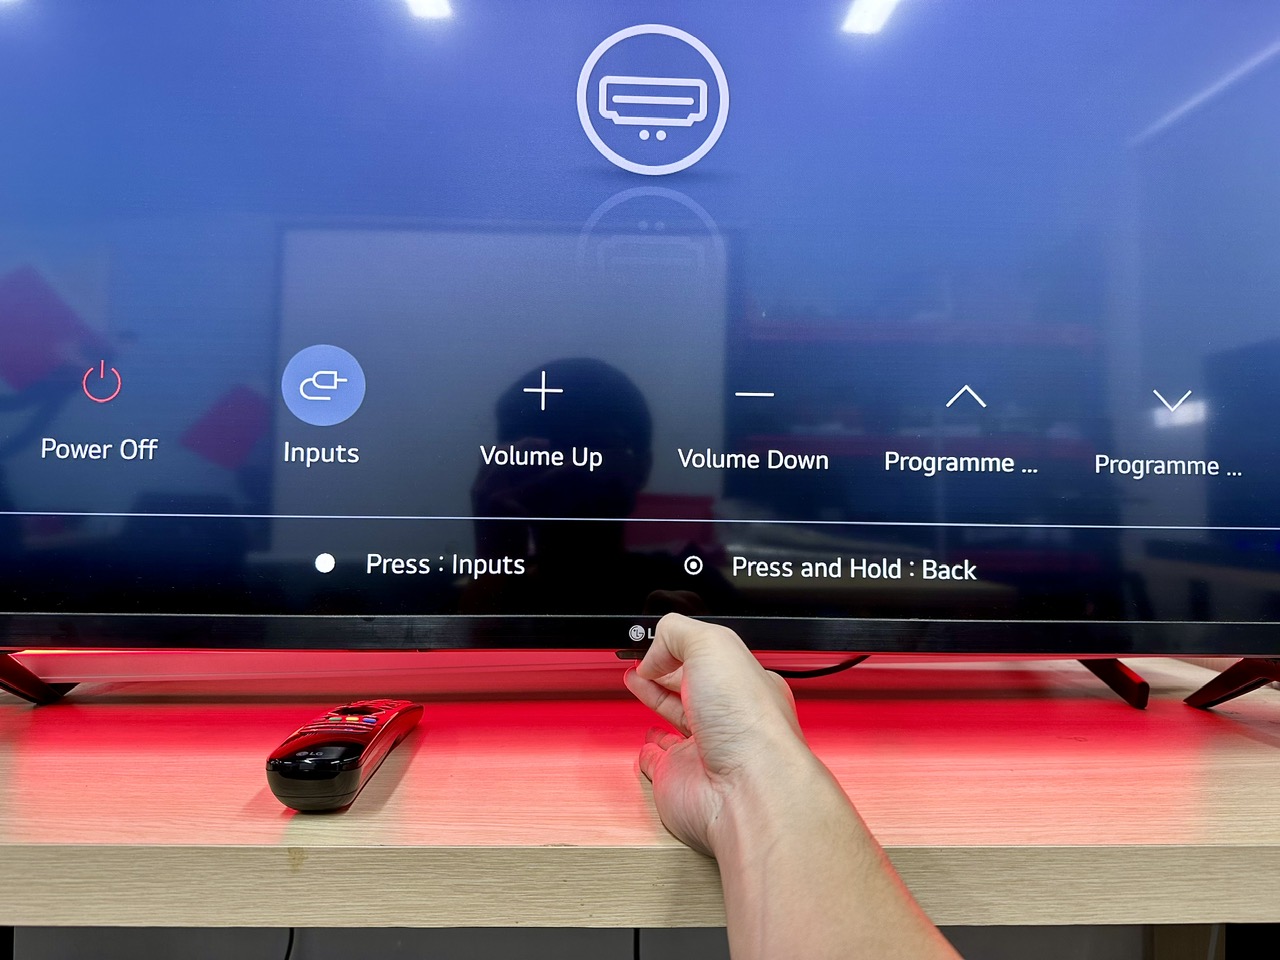 press the power button to confirm switching input on an lg tv